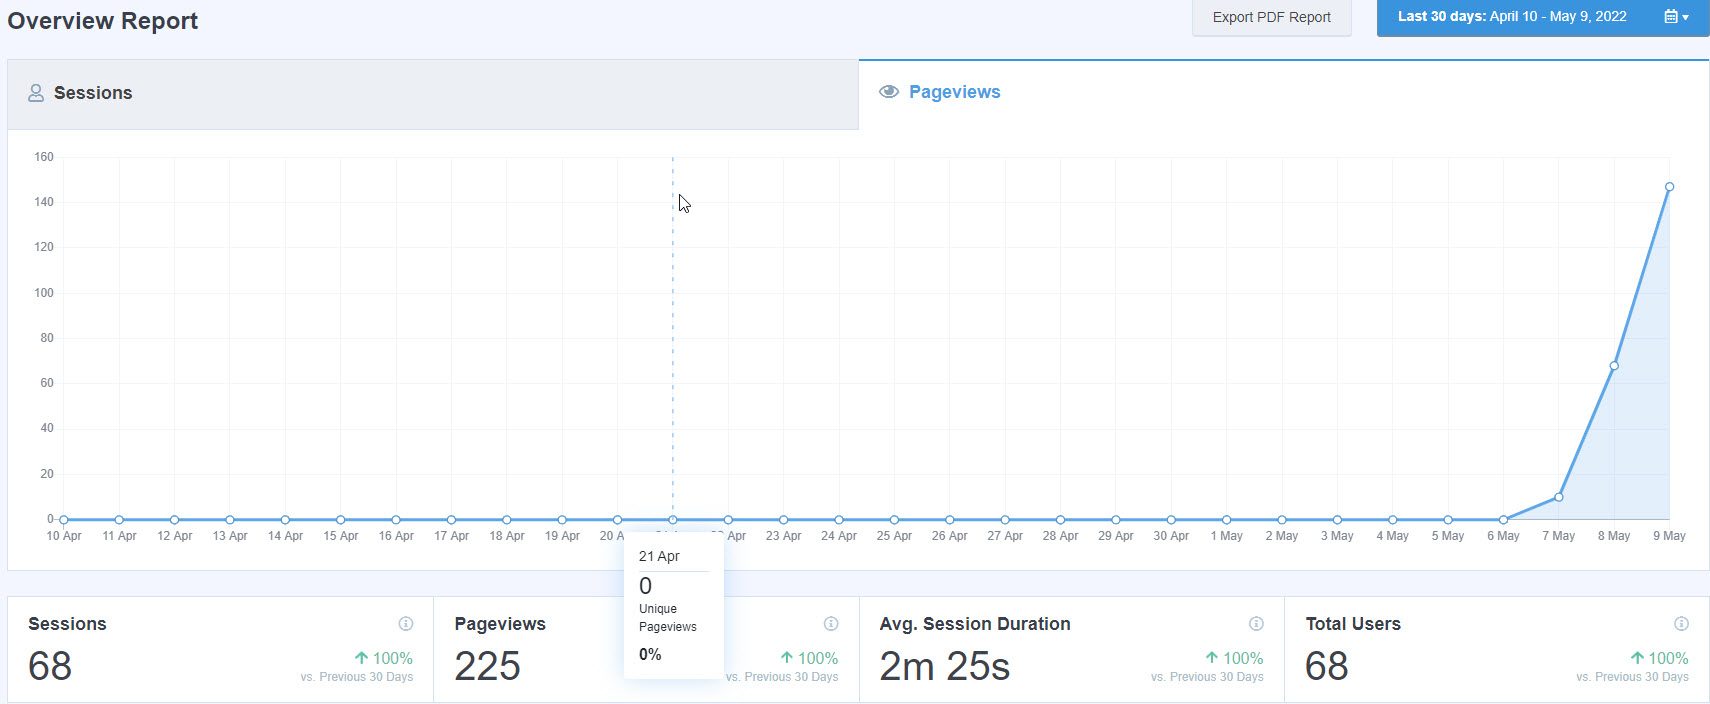 47 Overview Report Sessions and Page Views